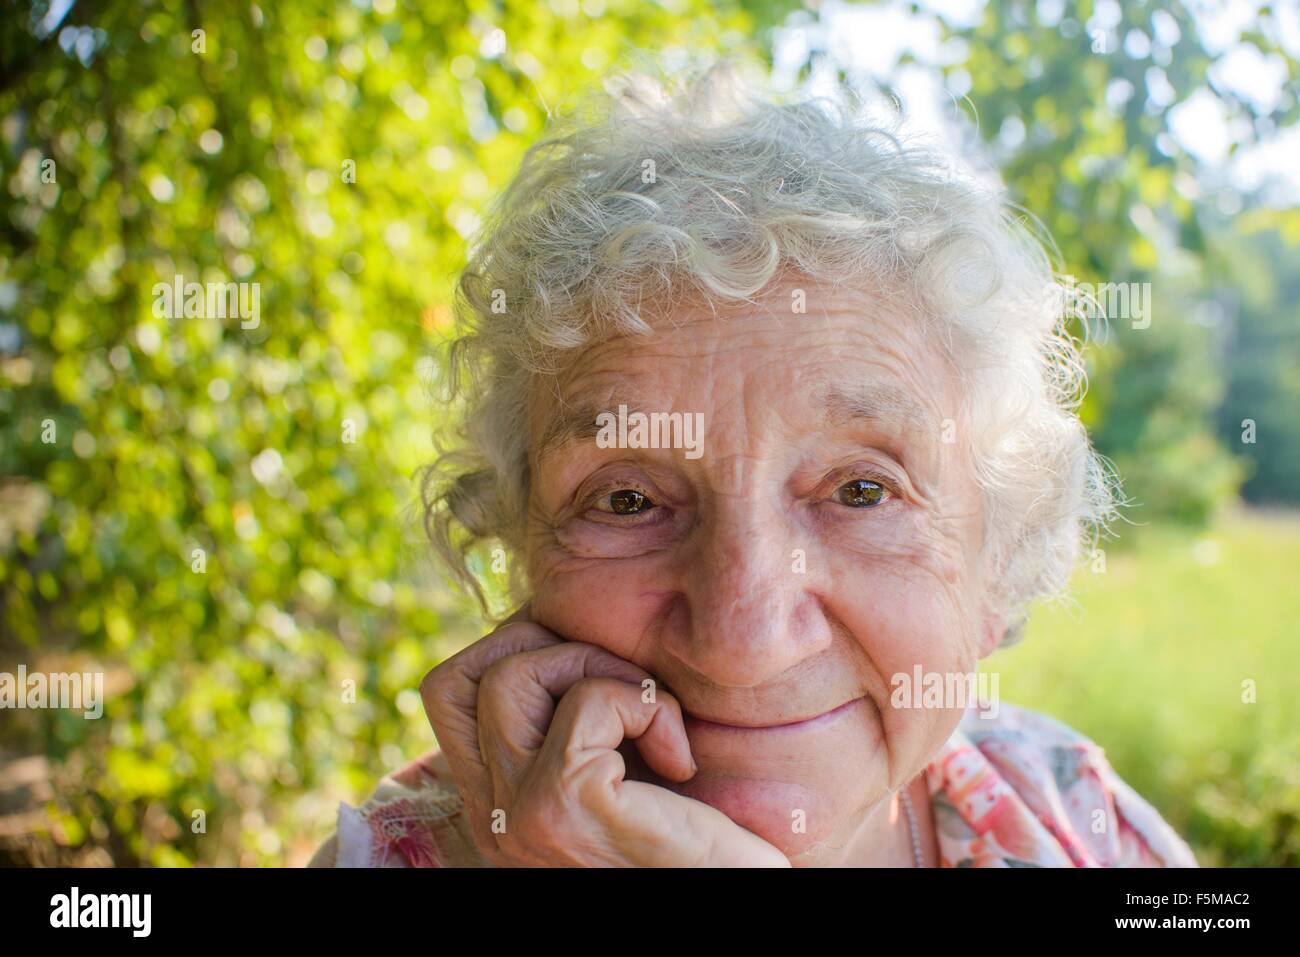 Close up of smiling senior woman outdoors Stock Photo